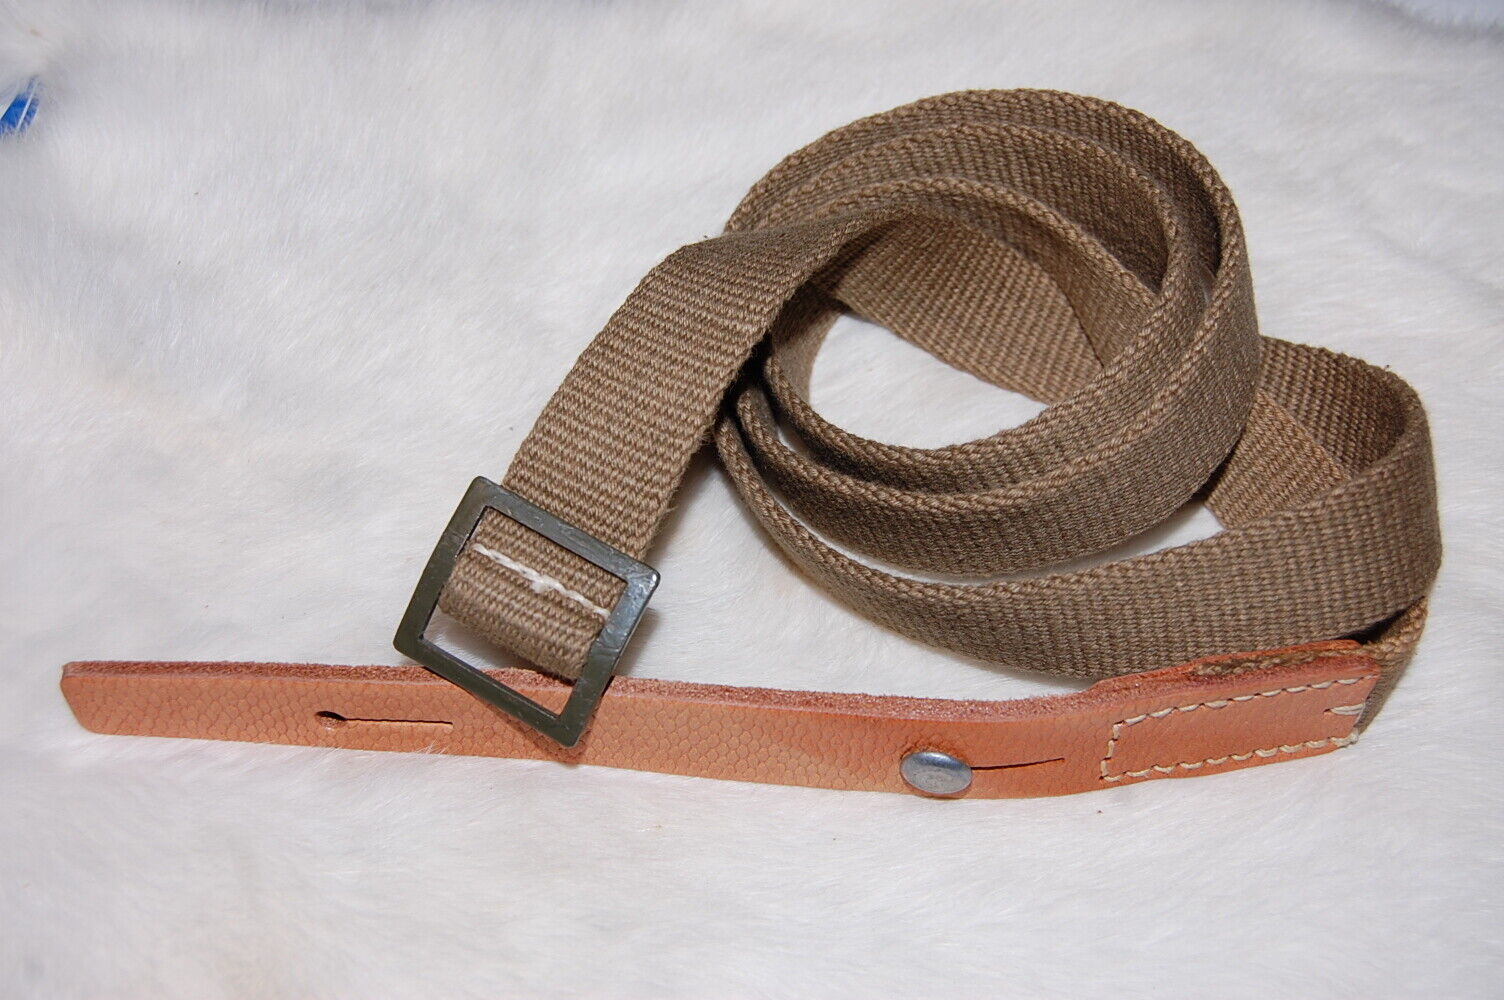 Czech Military Surplus SA 24/26 Rifle Sling - Unissued Condition